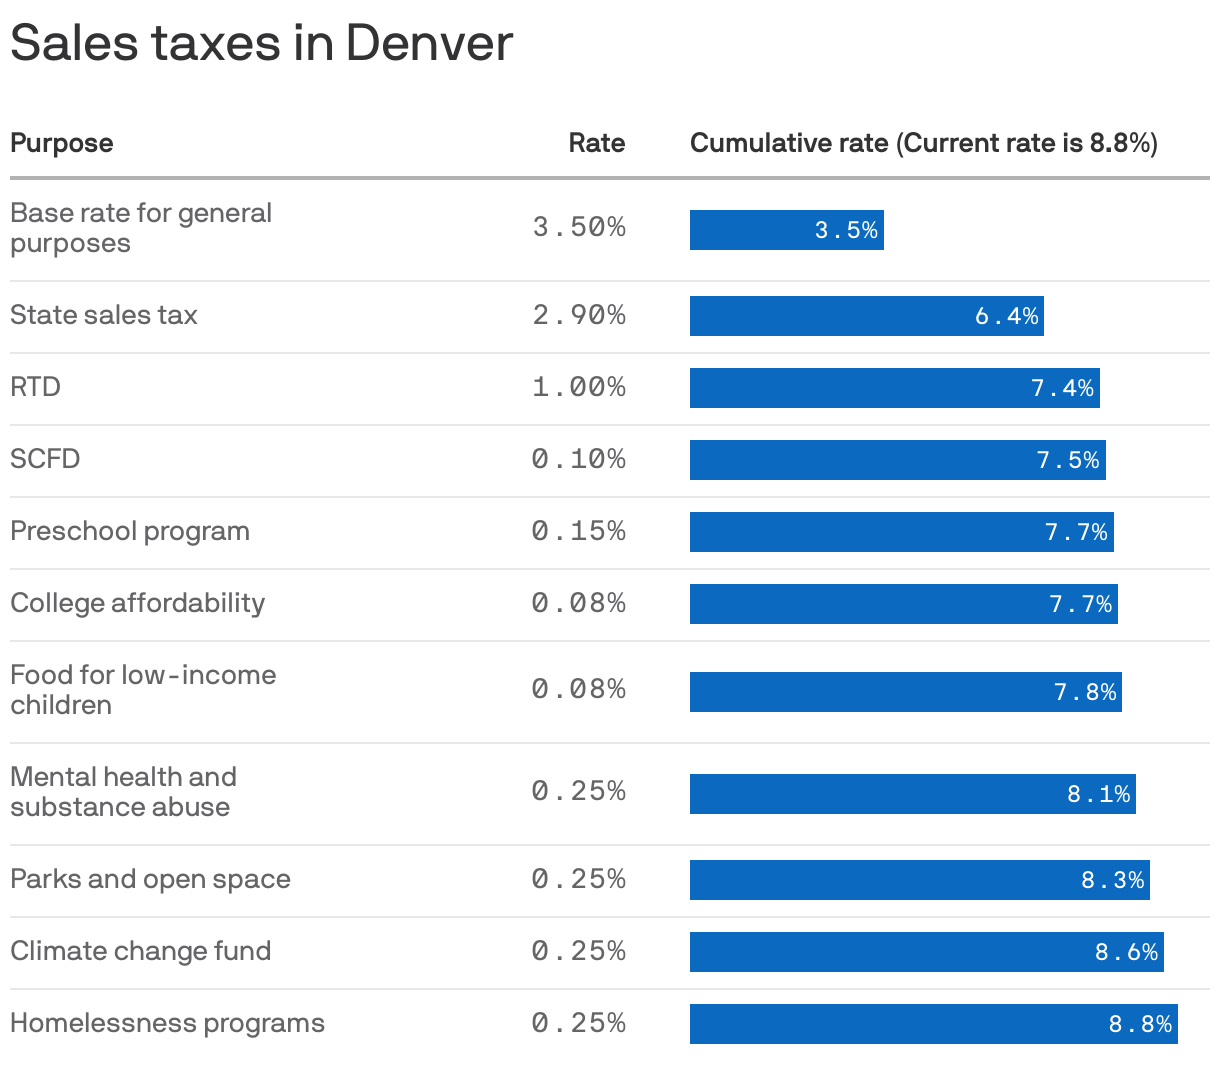 Sales taxes in Denver